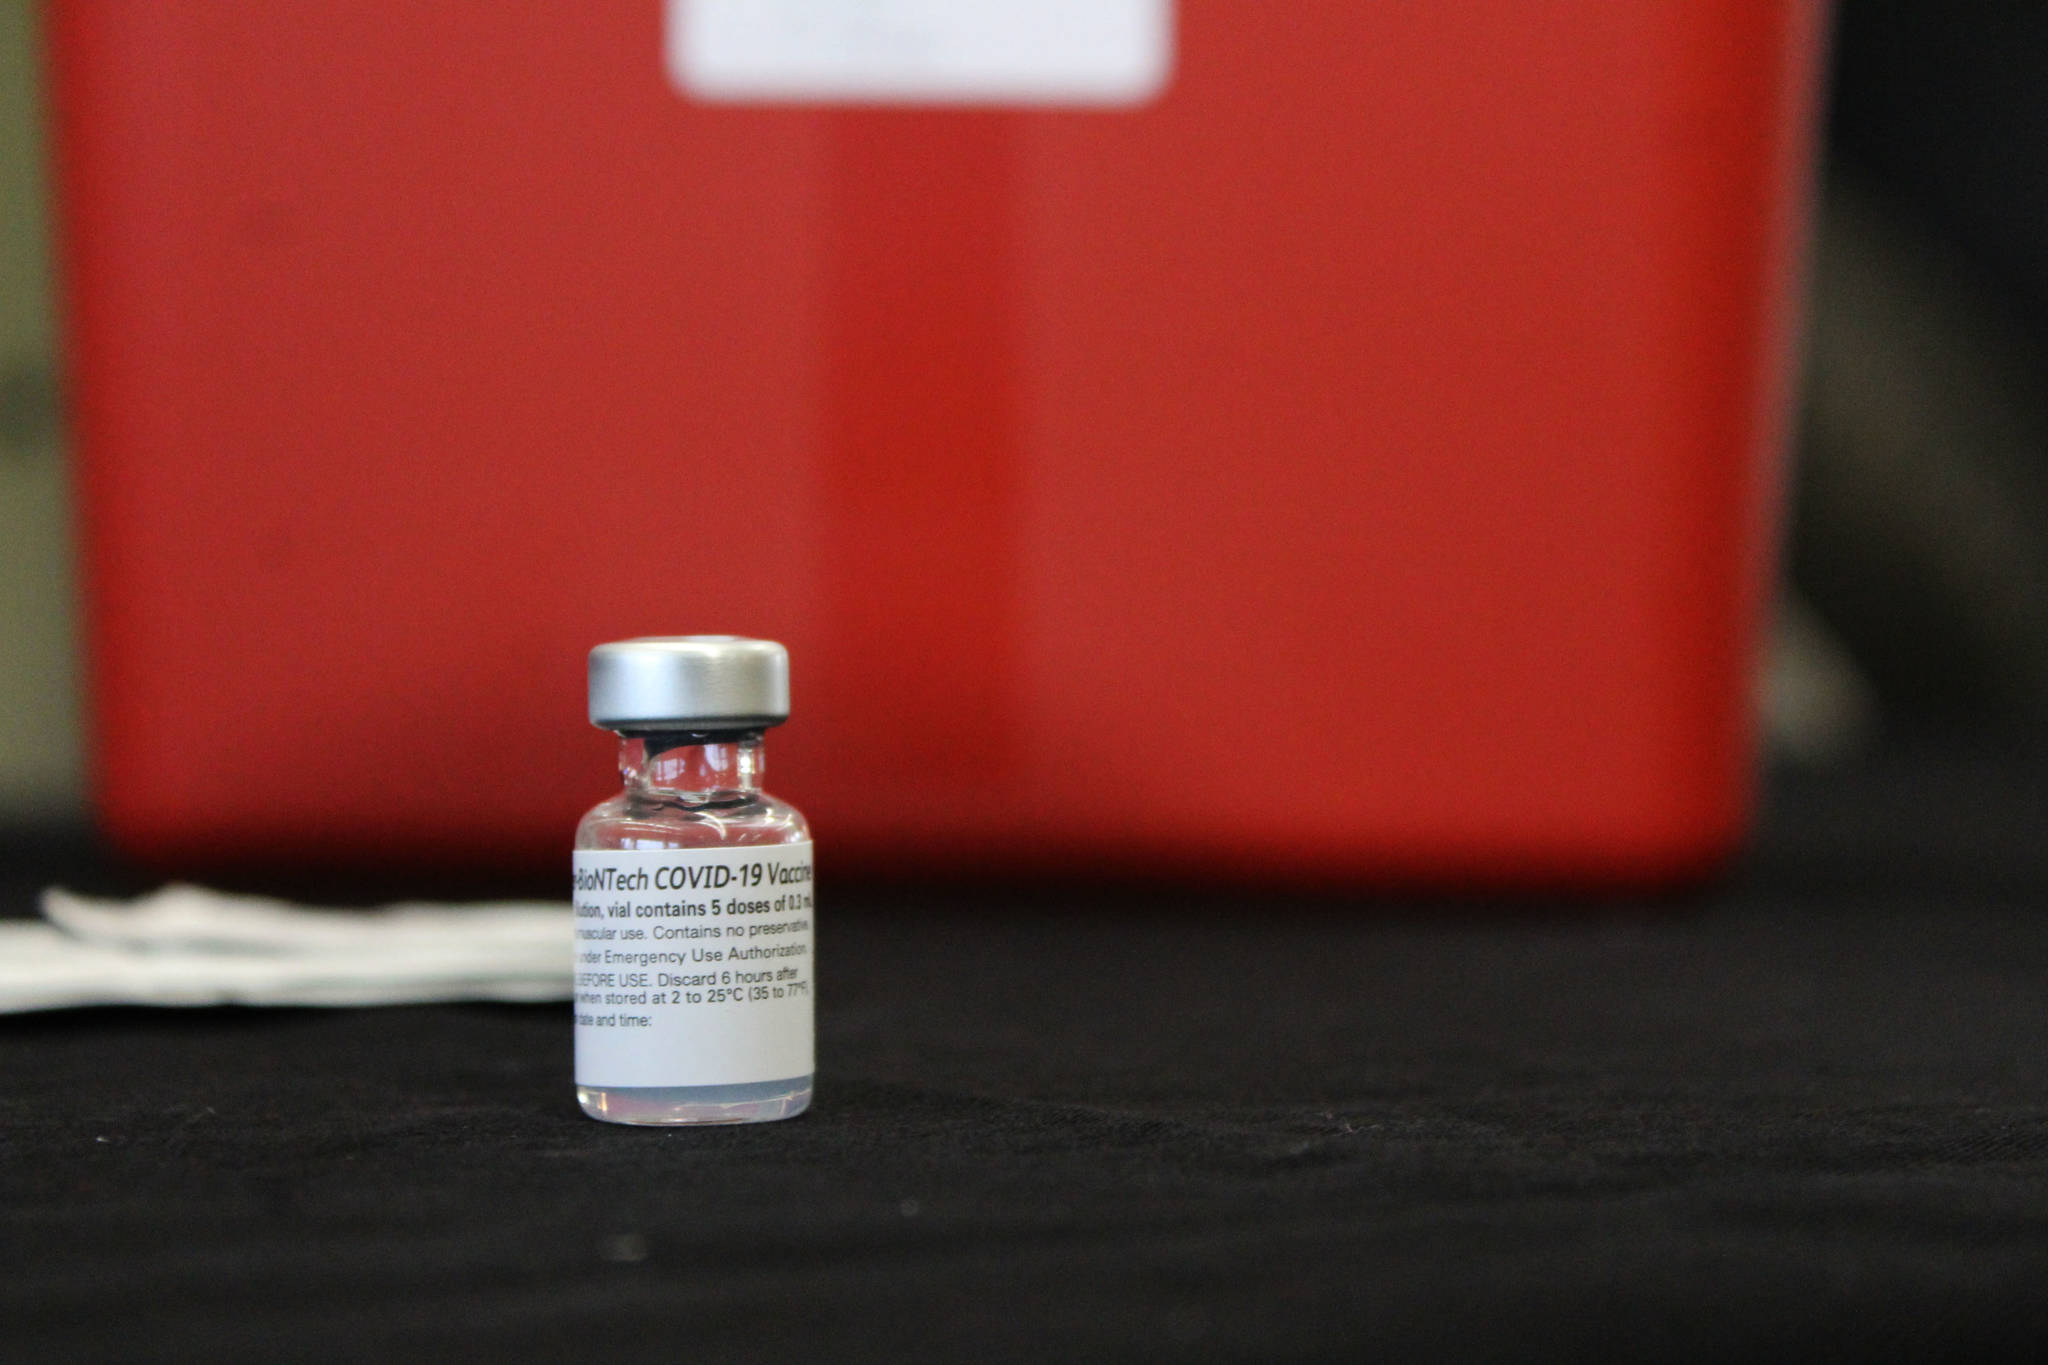 A vial of Pfizer’s COVID-19 vaccine is seen at Central Emergency Services Station 1 on Friday, Dec. 18, 2020, in Soldotna, Alaska. (Ashlyn O’Hara/Peninsula Clarion)